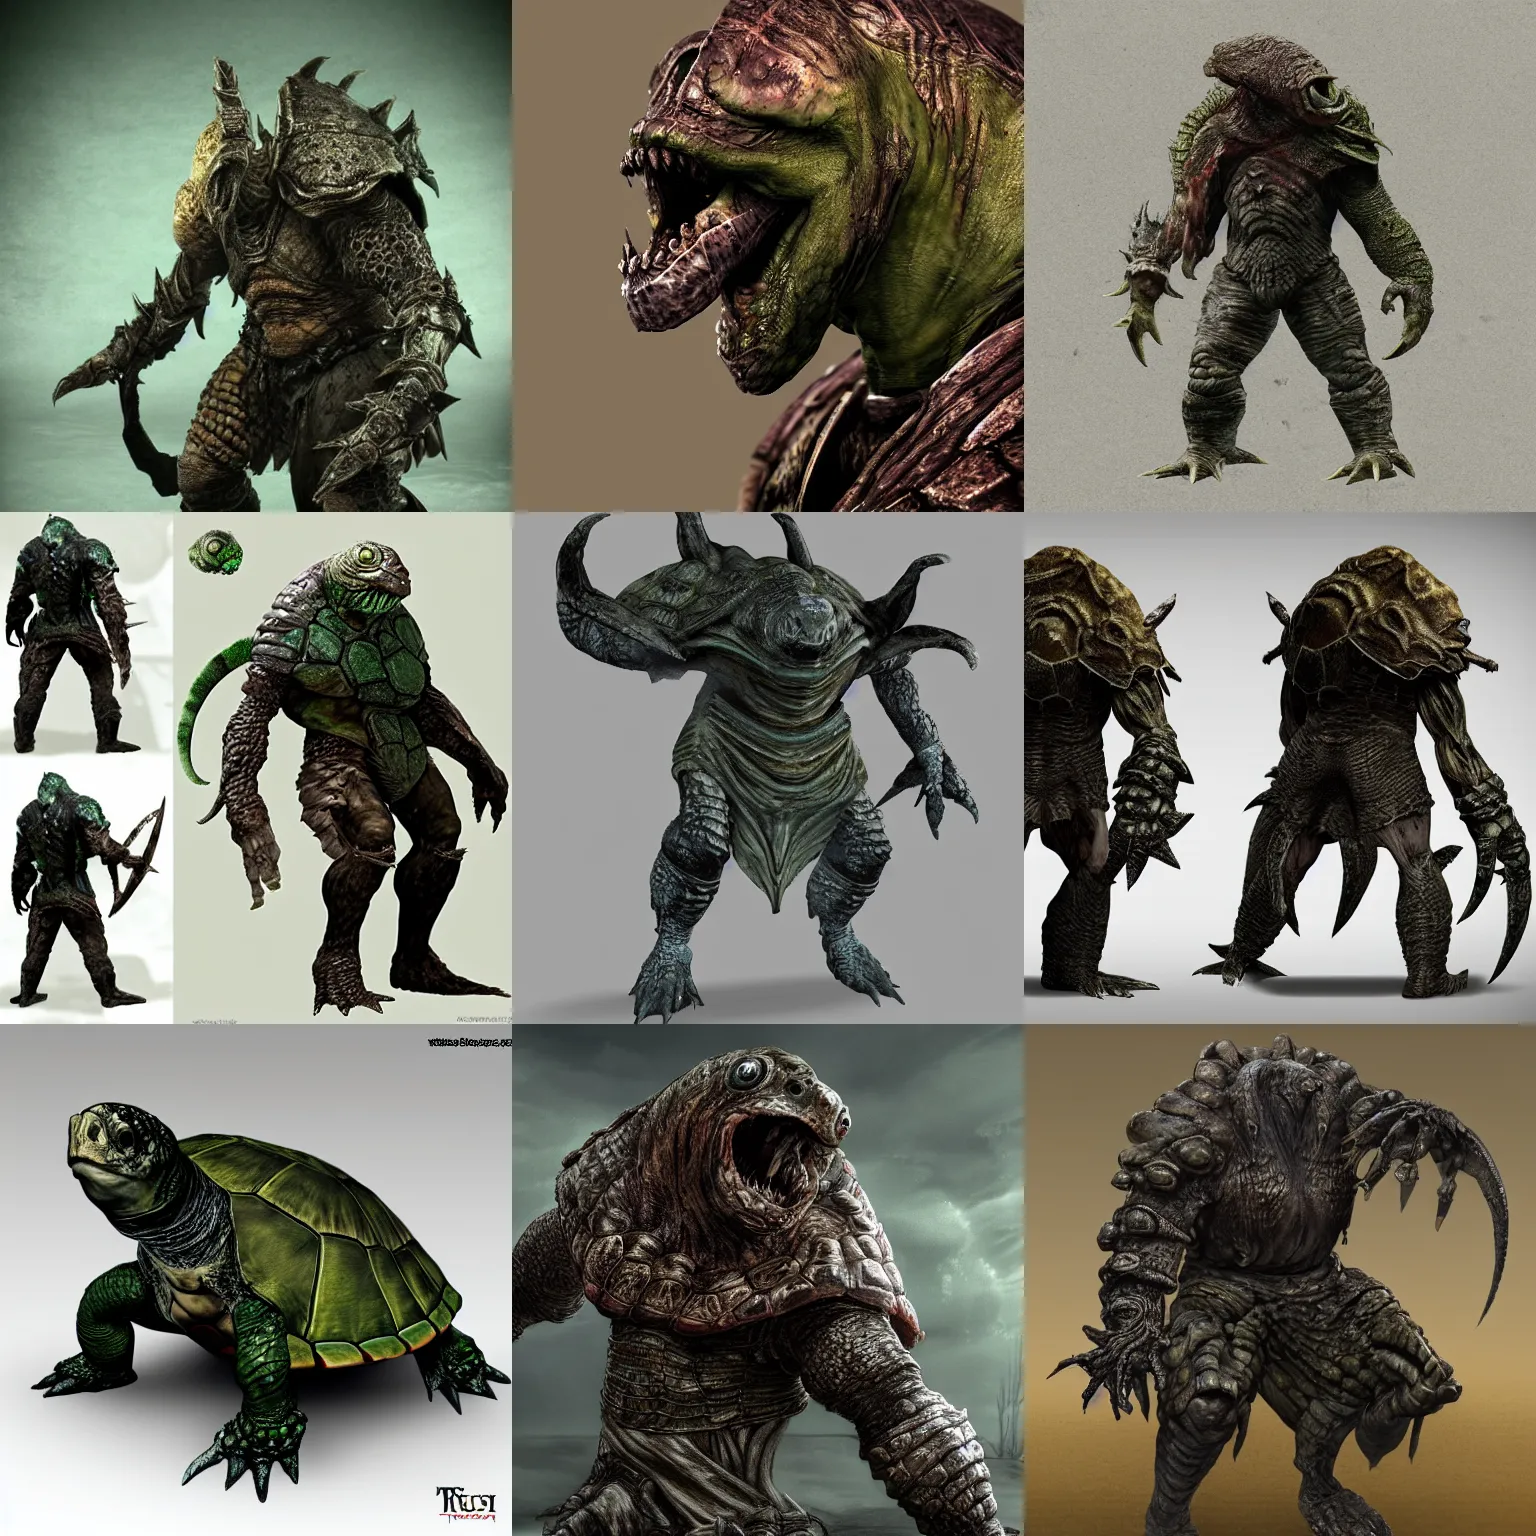 Prompt: elden ring, dark souls, humanoid sturdy turtle monster, photorealistic, grimdark, gruesome, full height, front and side view